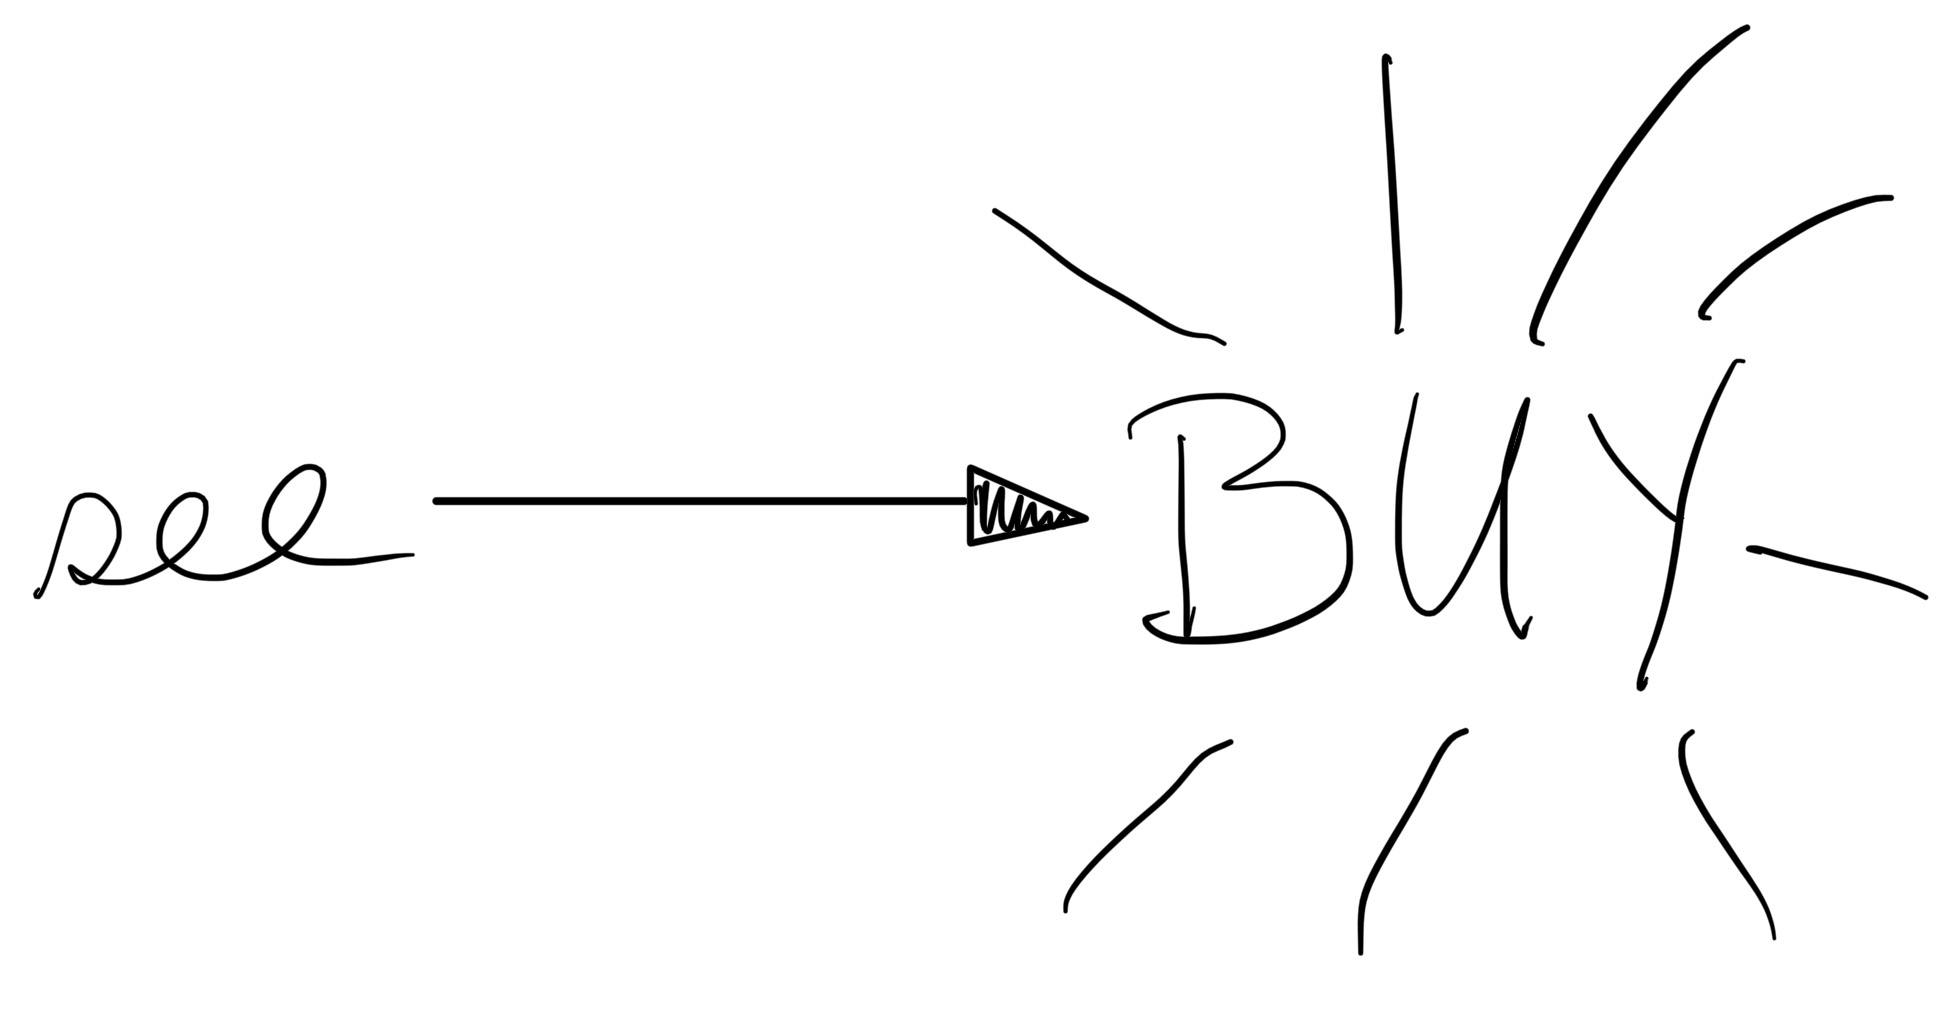 A fancy drawing with "see" and an arrow pointing to "BUY" with lines around it. 